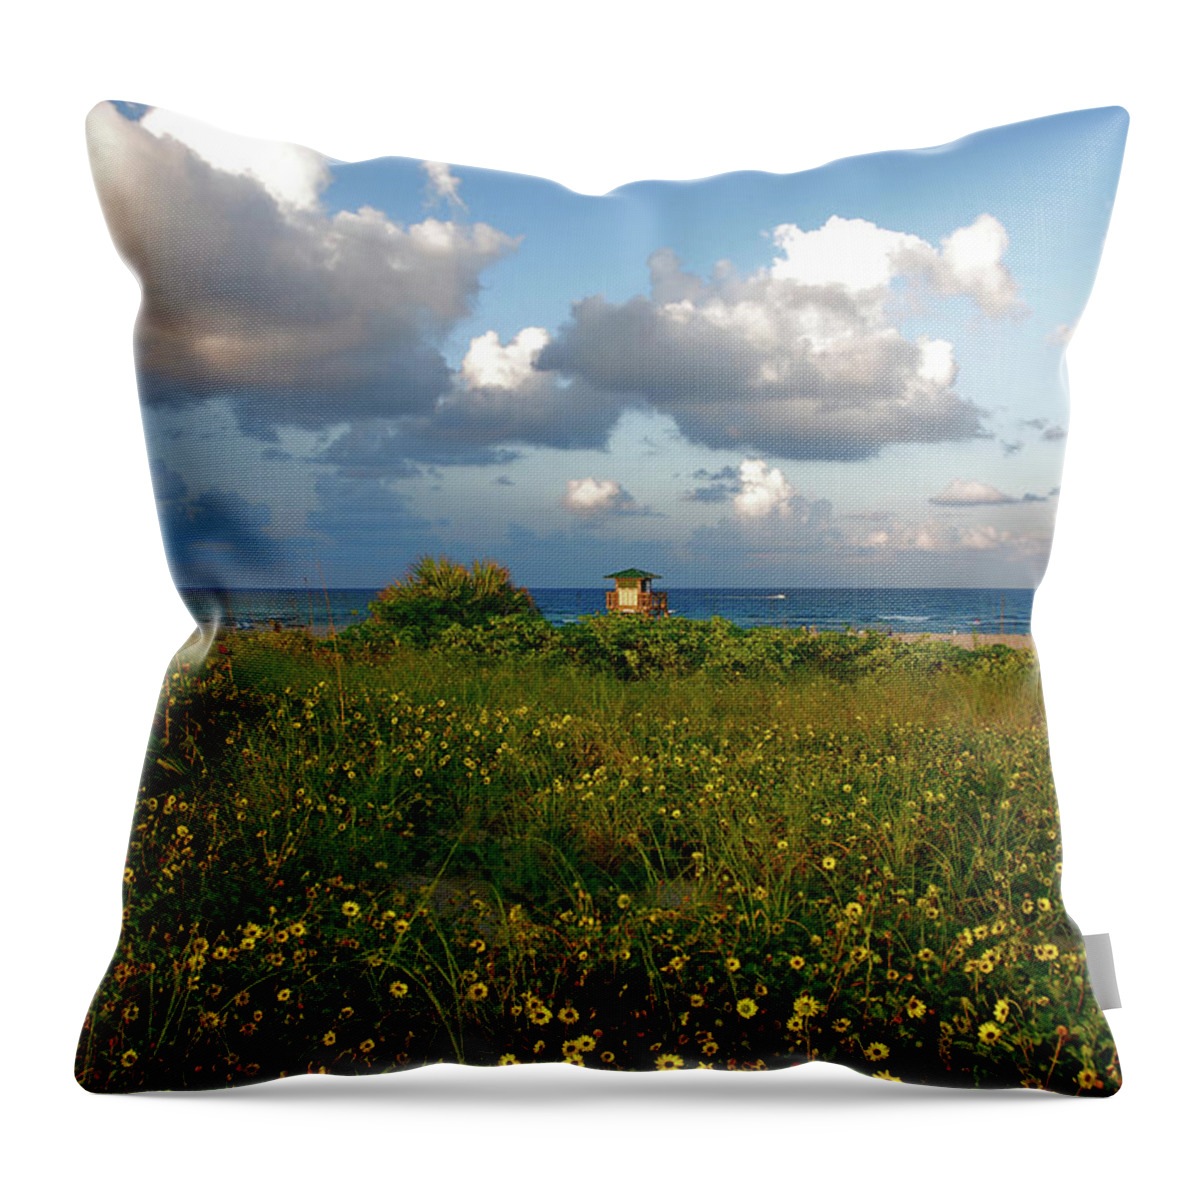 Sunflowers Throw Pillow featuring the photograph 8- Sunflowers In Paradise by Joseph Keane